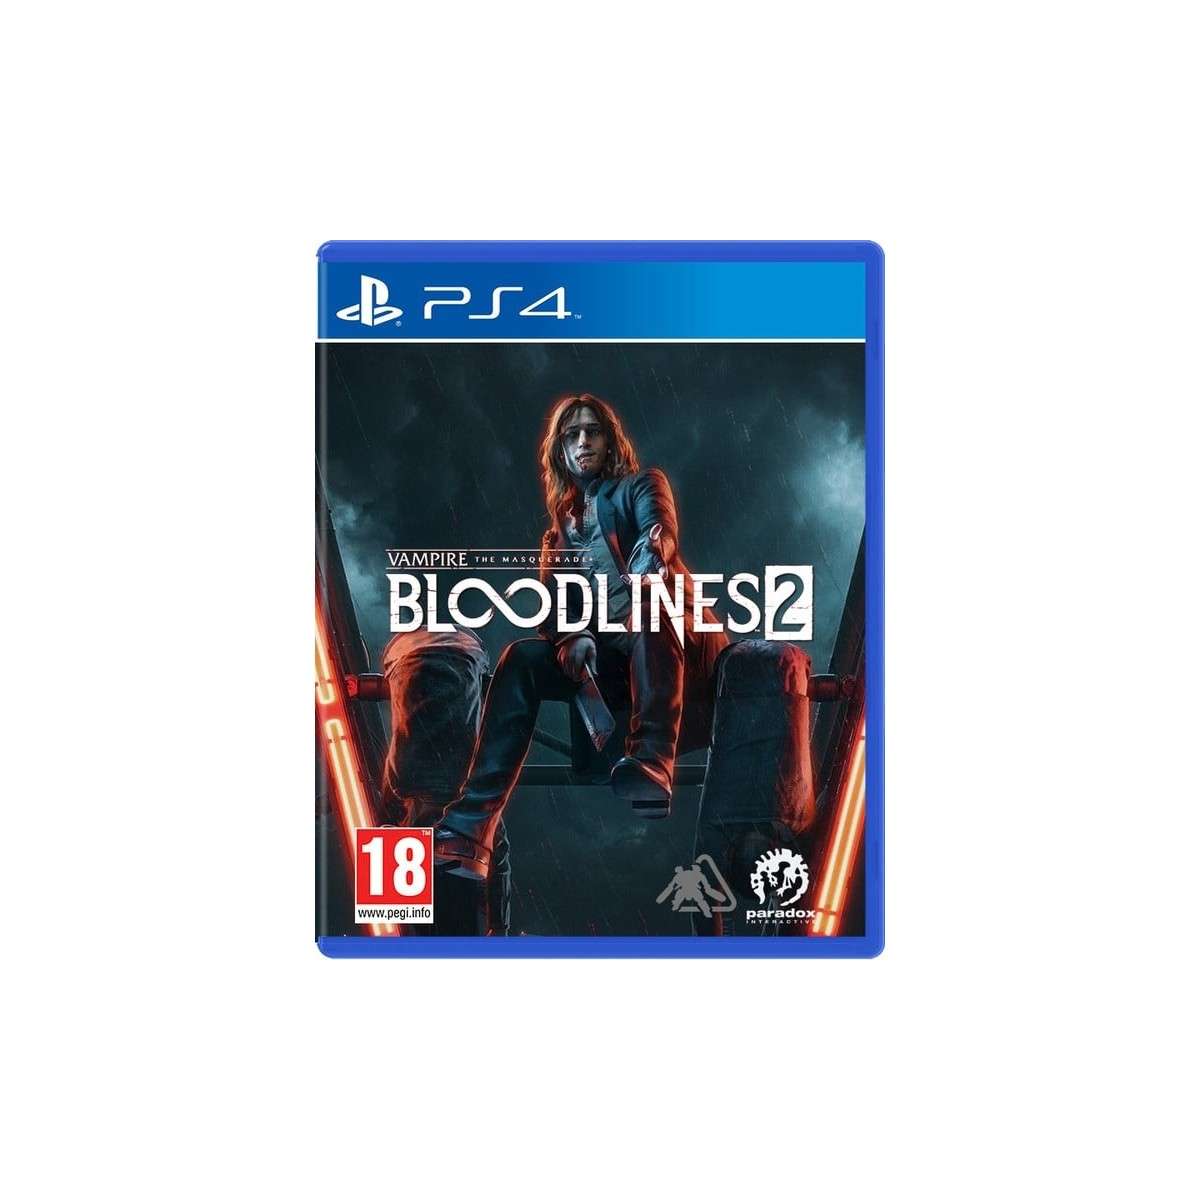 Vampire: The Masquerade Bloodlines 2 First Blood Edition - PlayStation 4, PlayStation 4